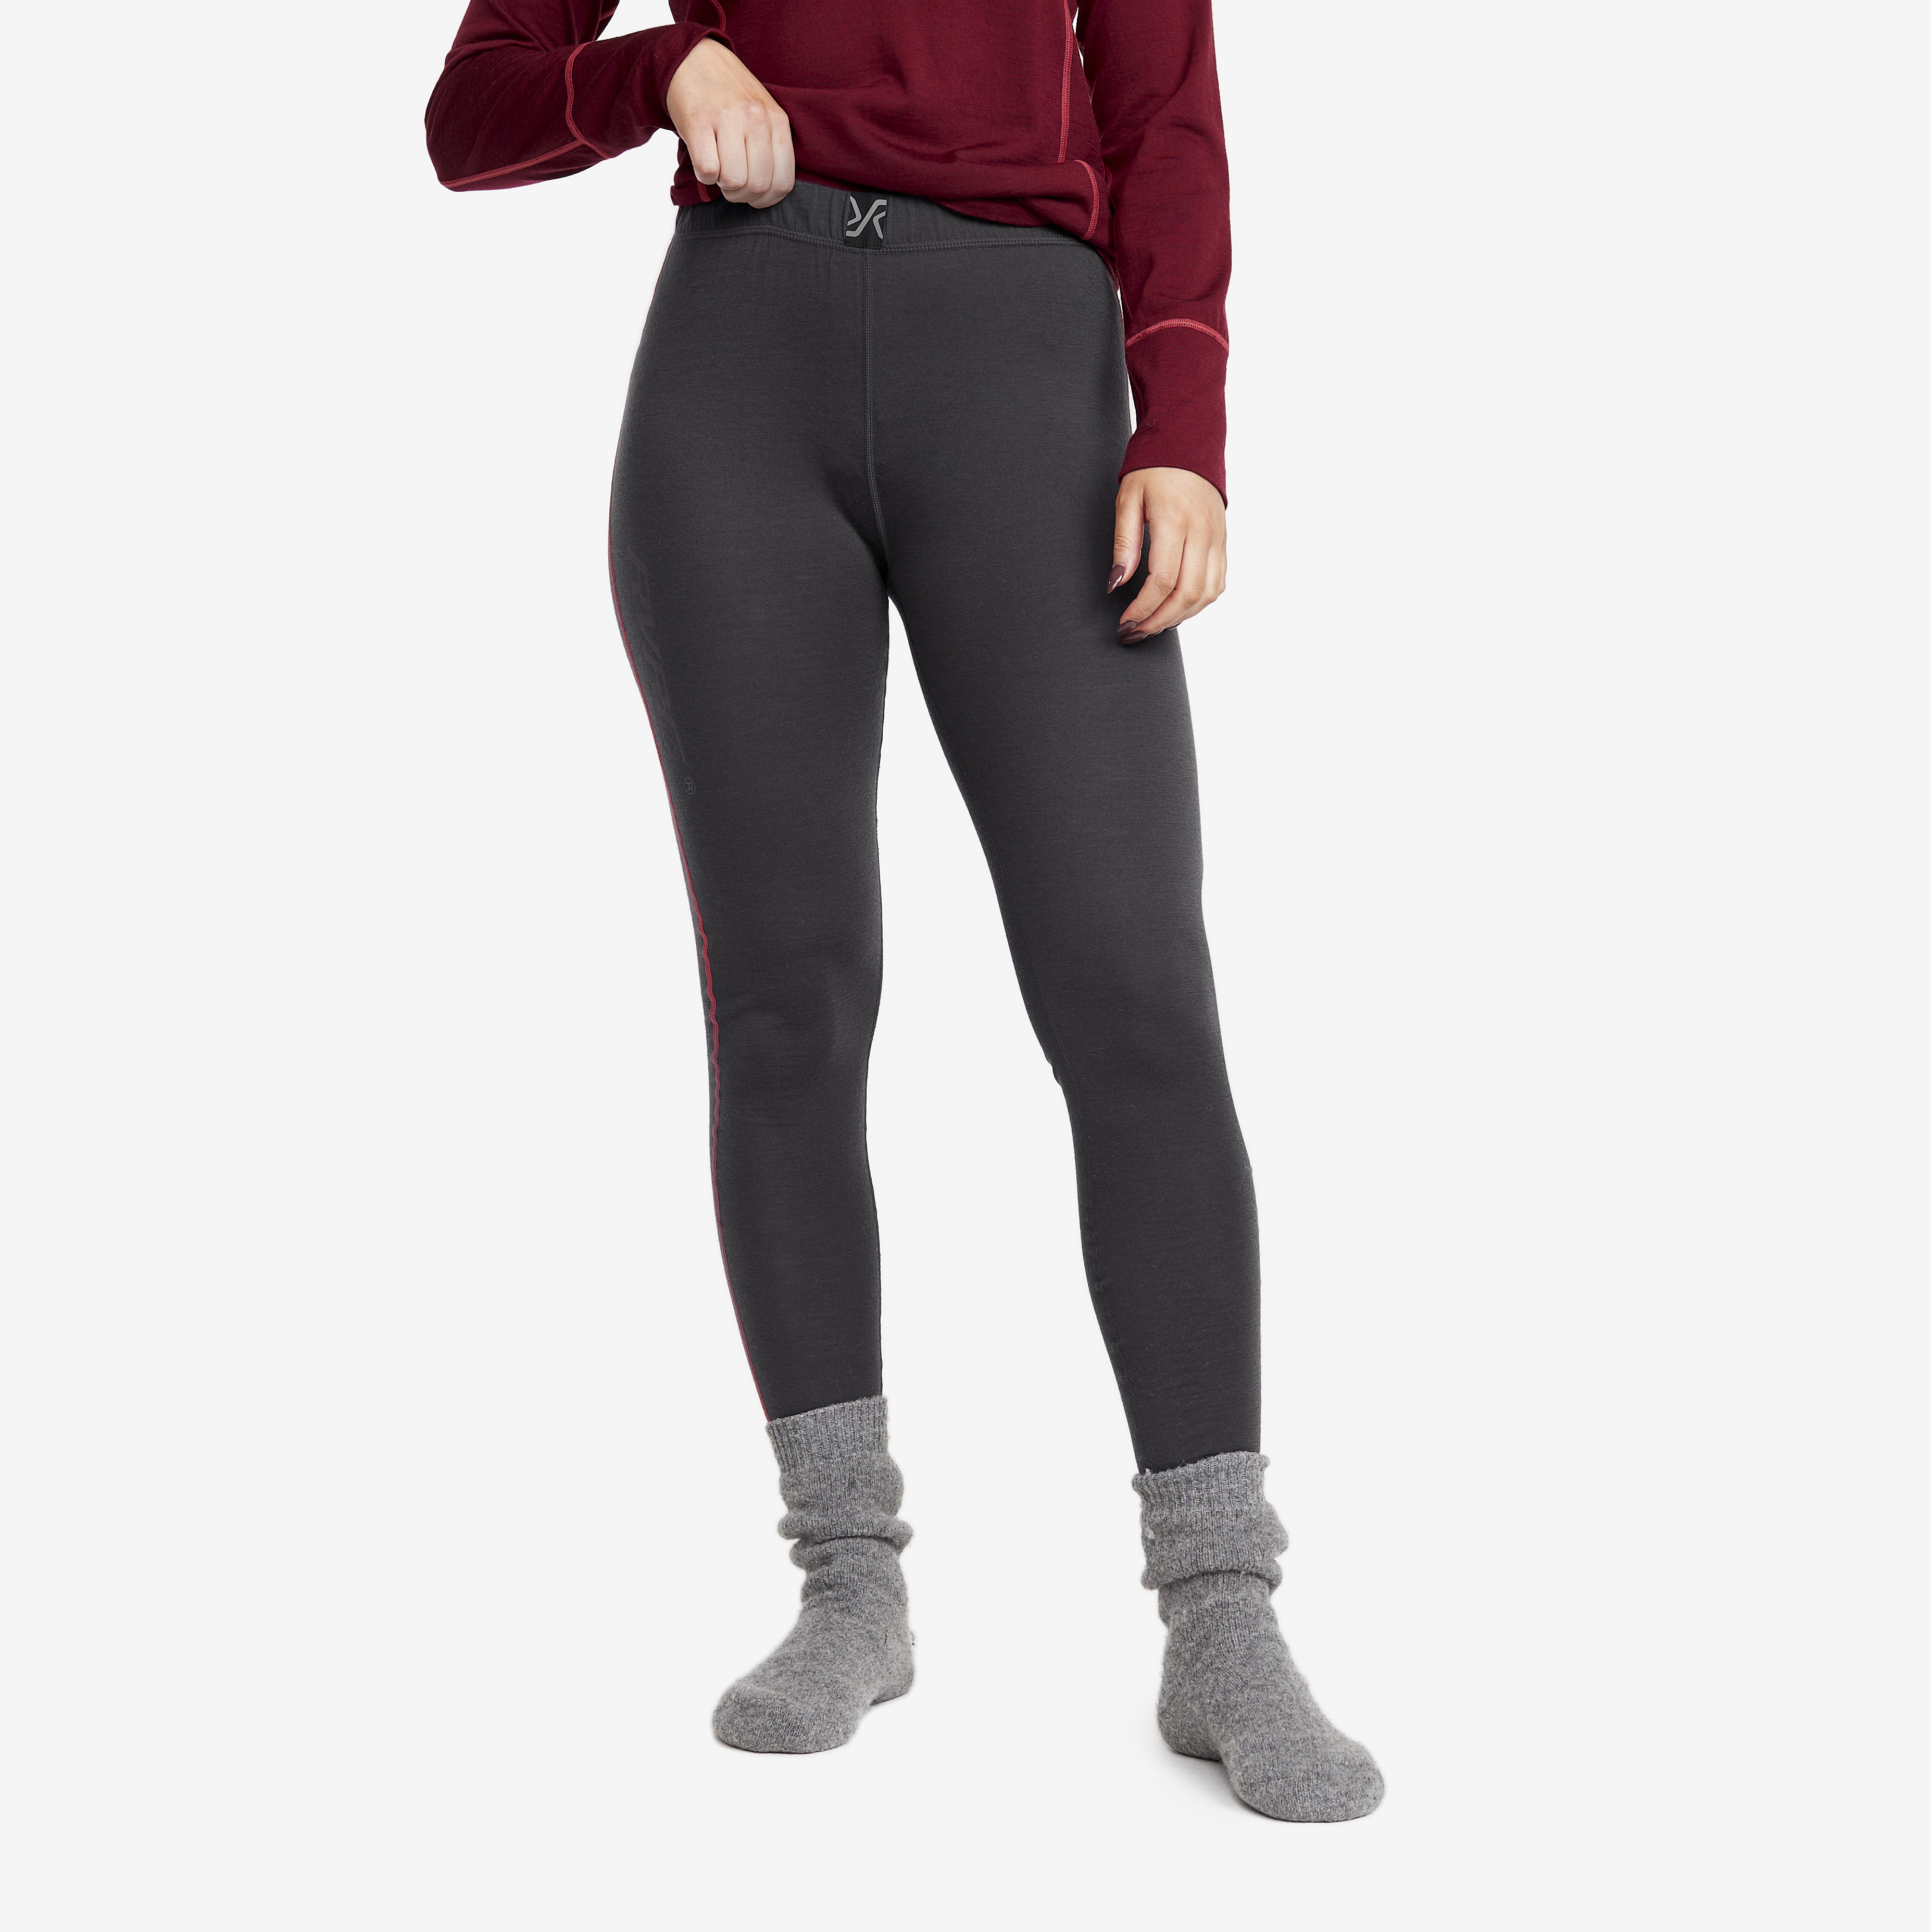 Outright Merino Trousers Anthracite Women